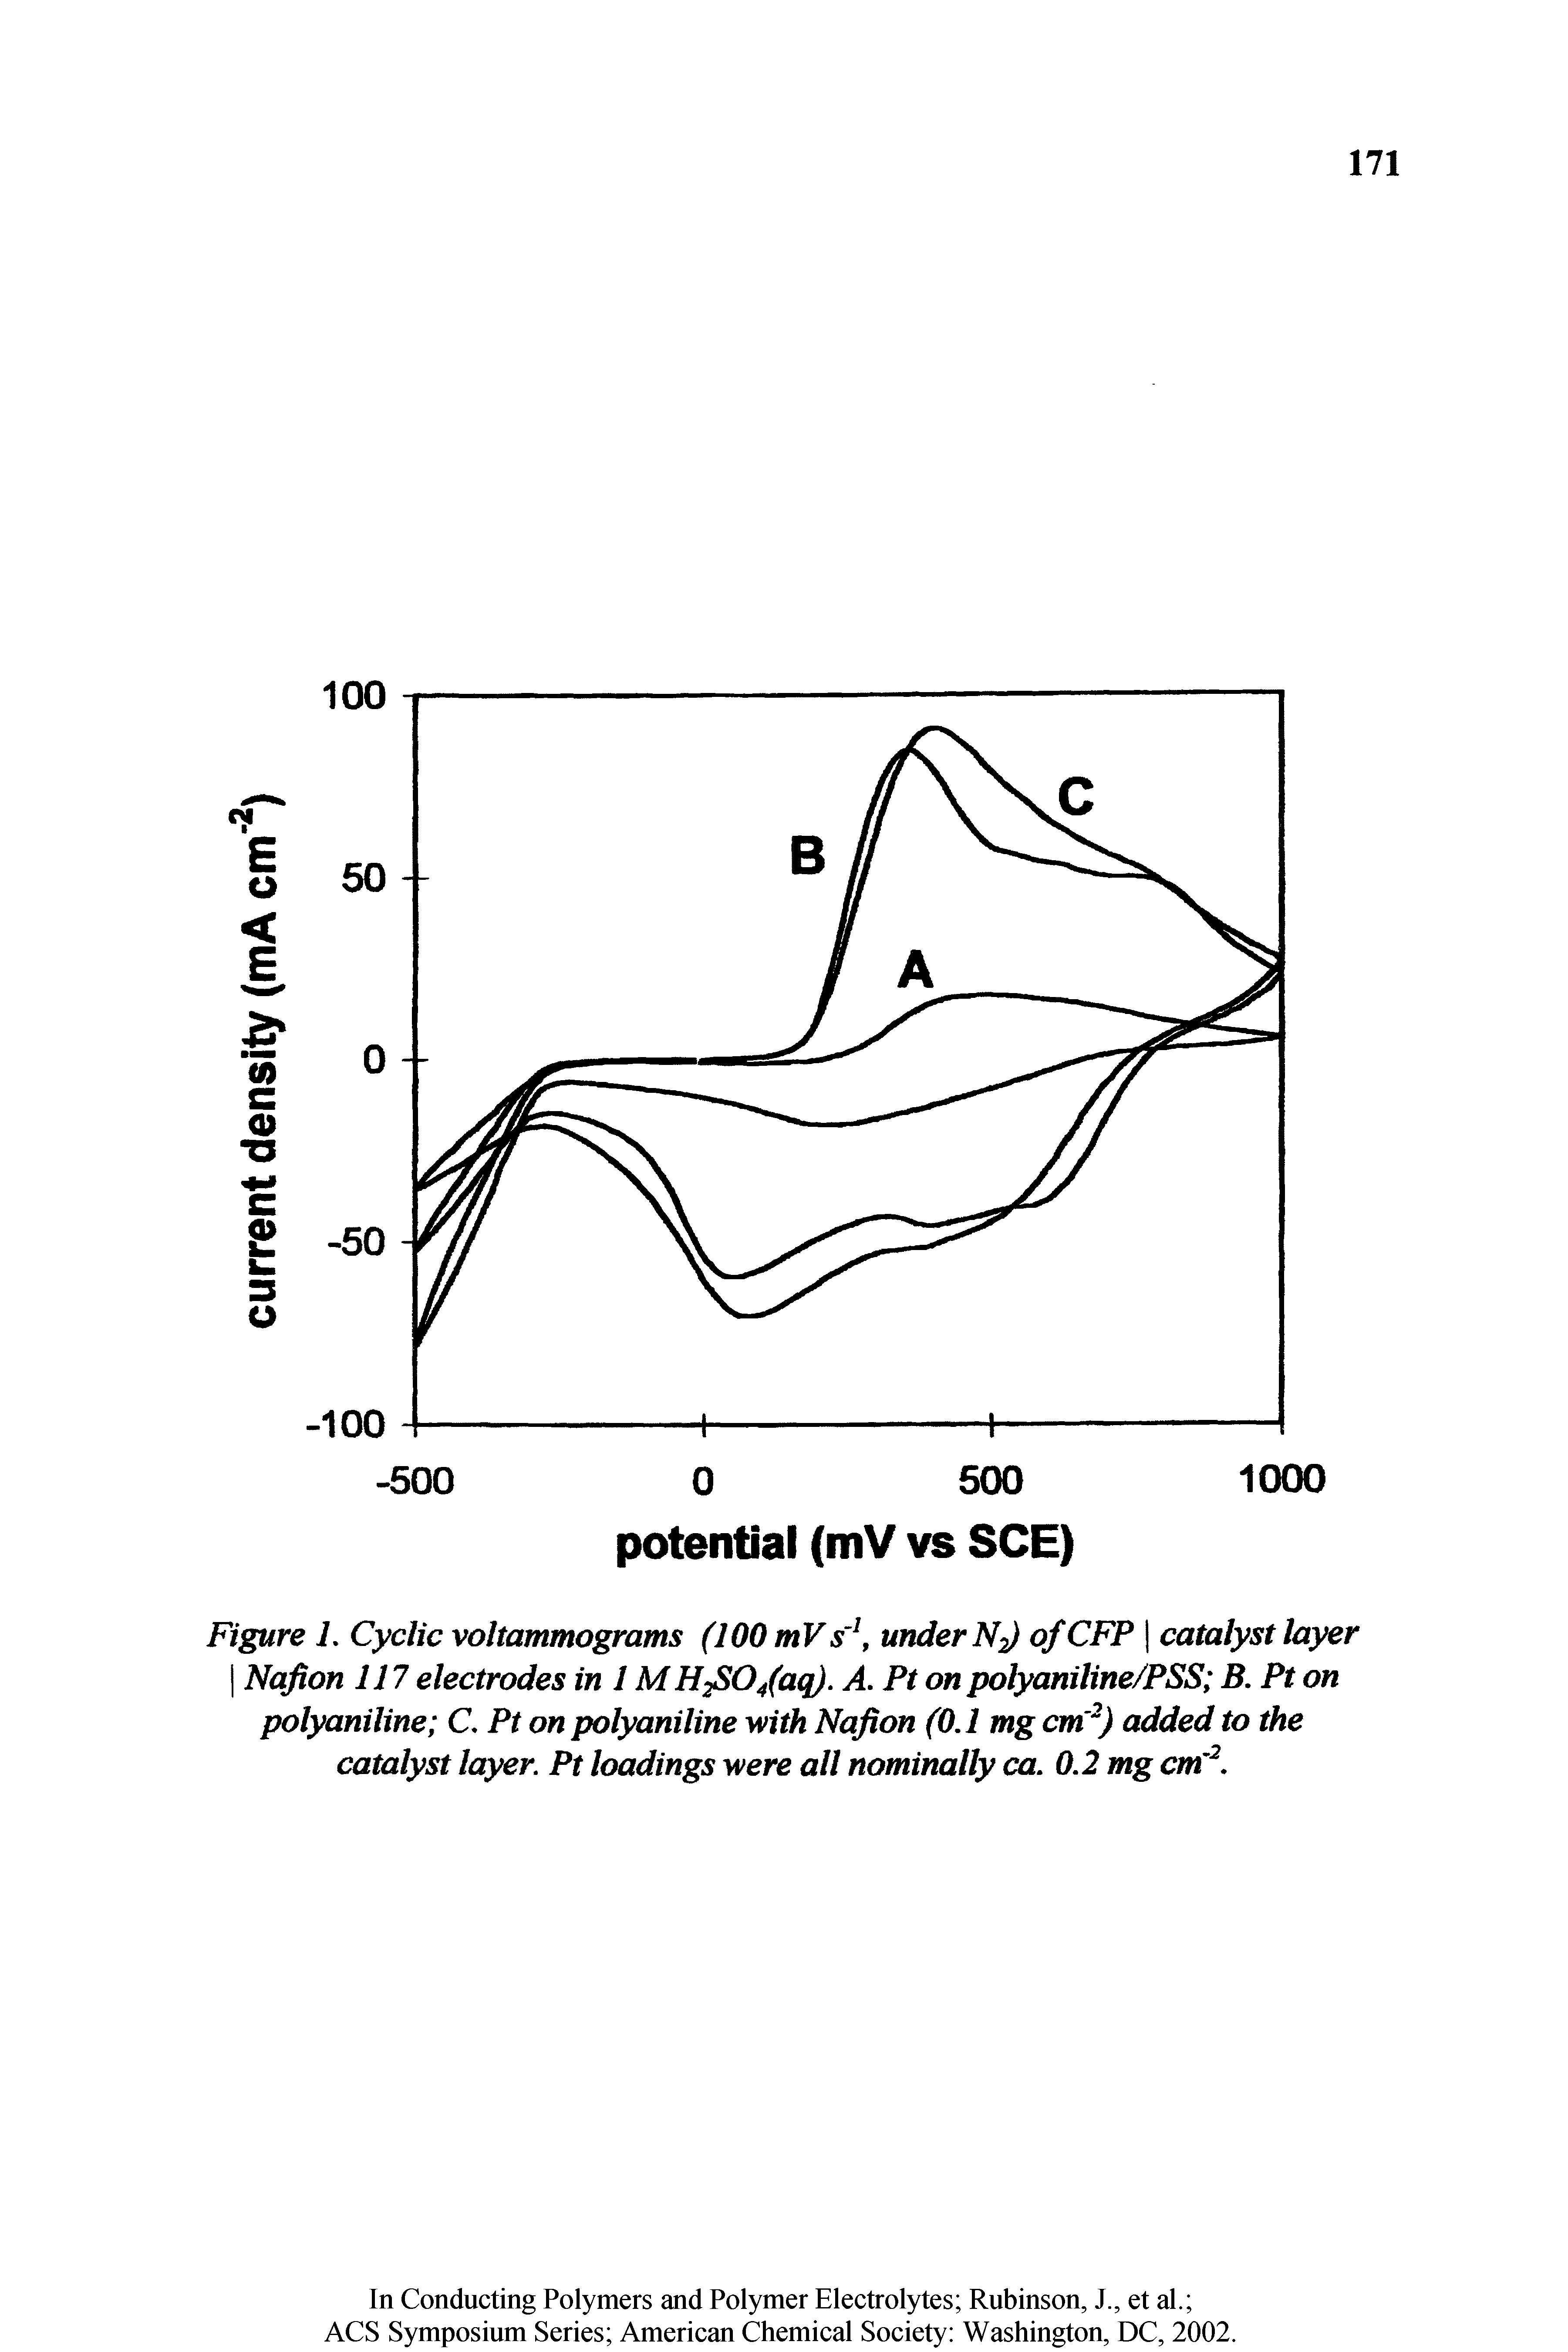 Figure L Cyclic voltammograms (100 mVs under N2) of CFP catalyst layer I Nafion 117 electrodes in 1 MH Ofaq). A. Pt on polyaniline/PSS B, Pt on polyaniline C Pt on polyaniline with Nafion (0.1 mg cm ) added to the catalyst layer. Pt loadings were all nominally ca. 0.2 mg cm . ...